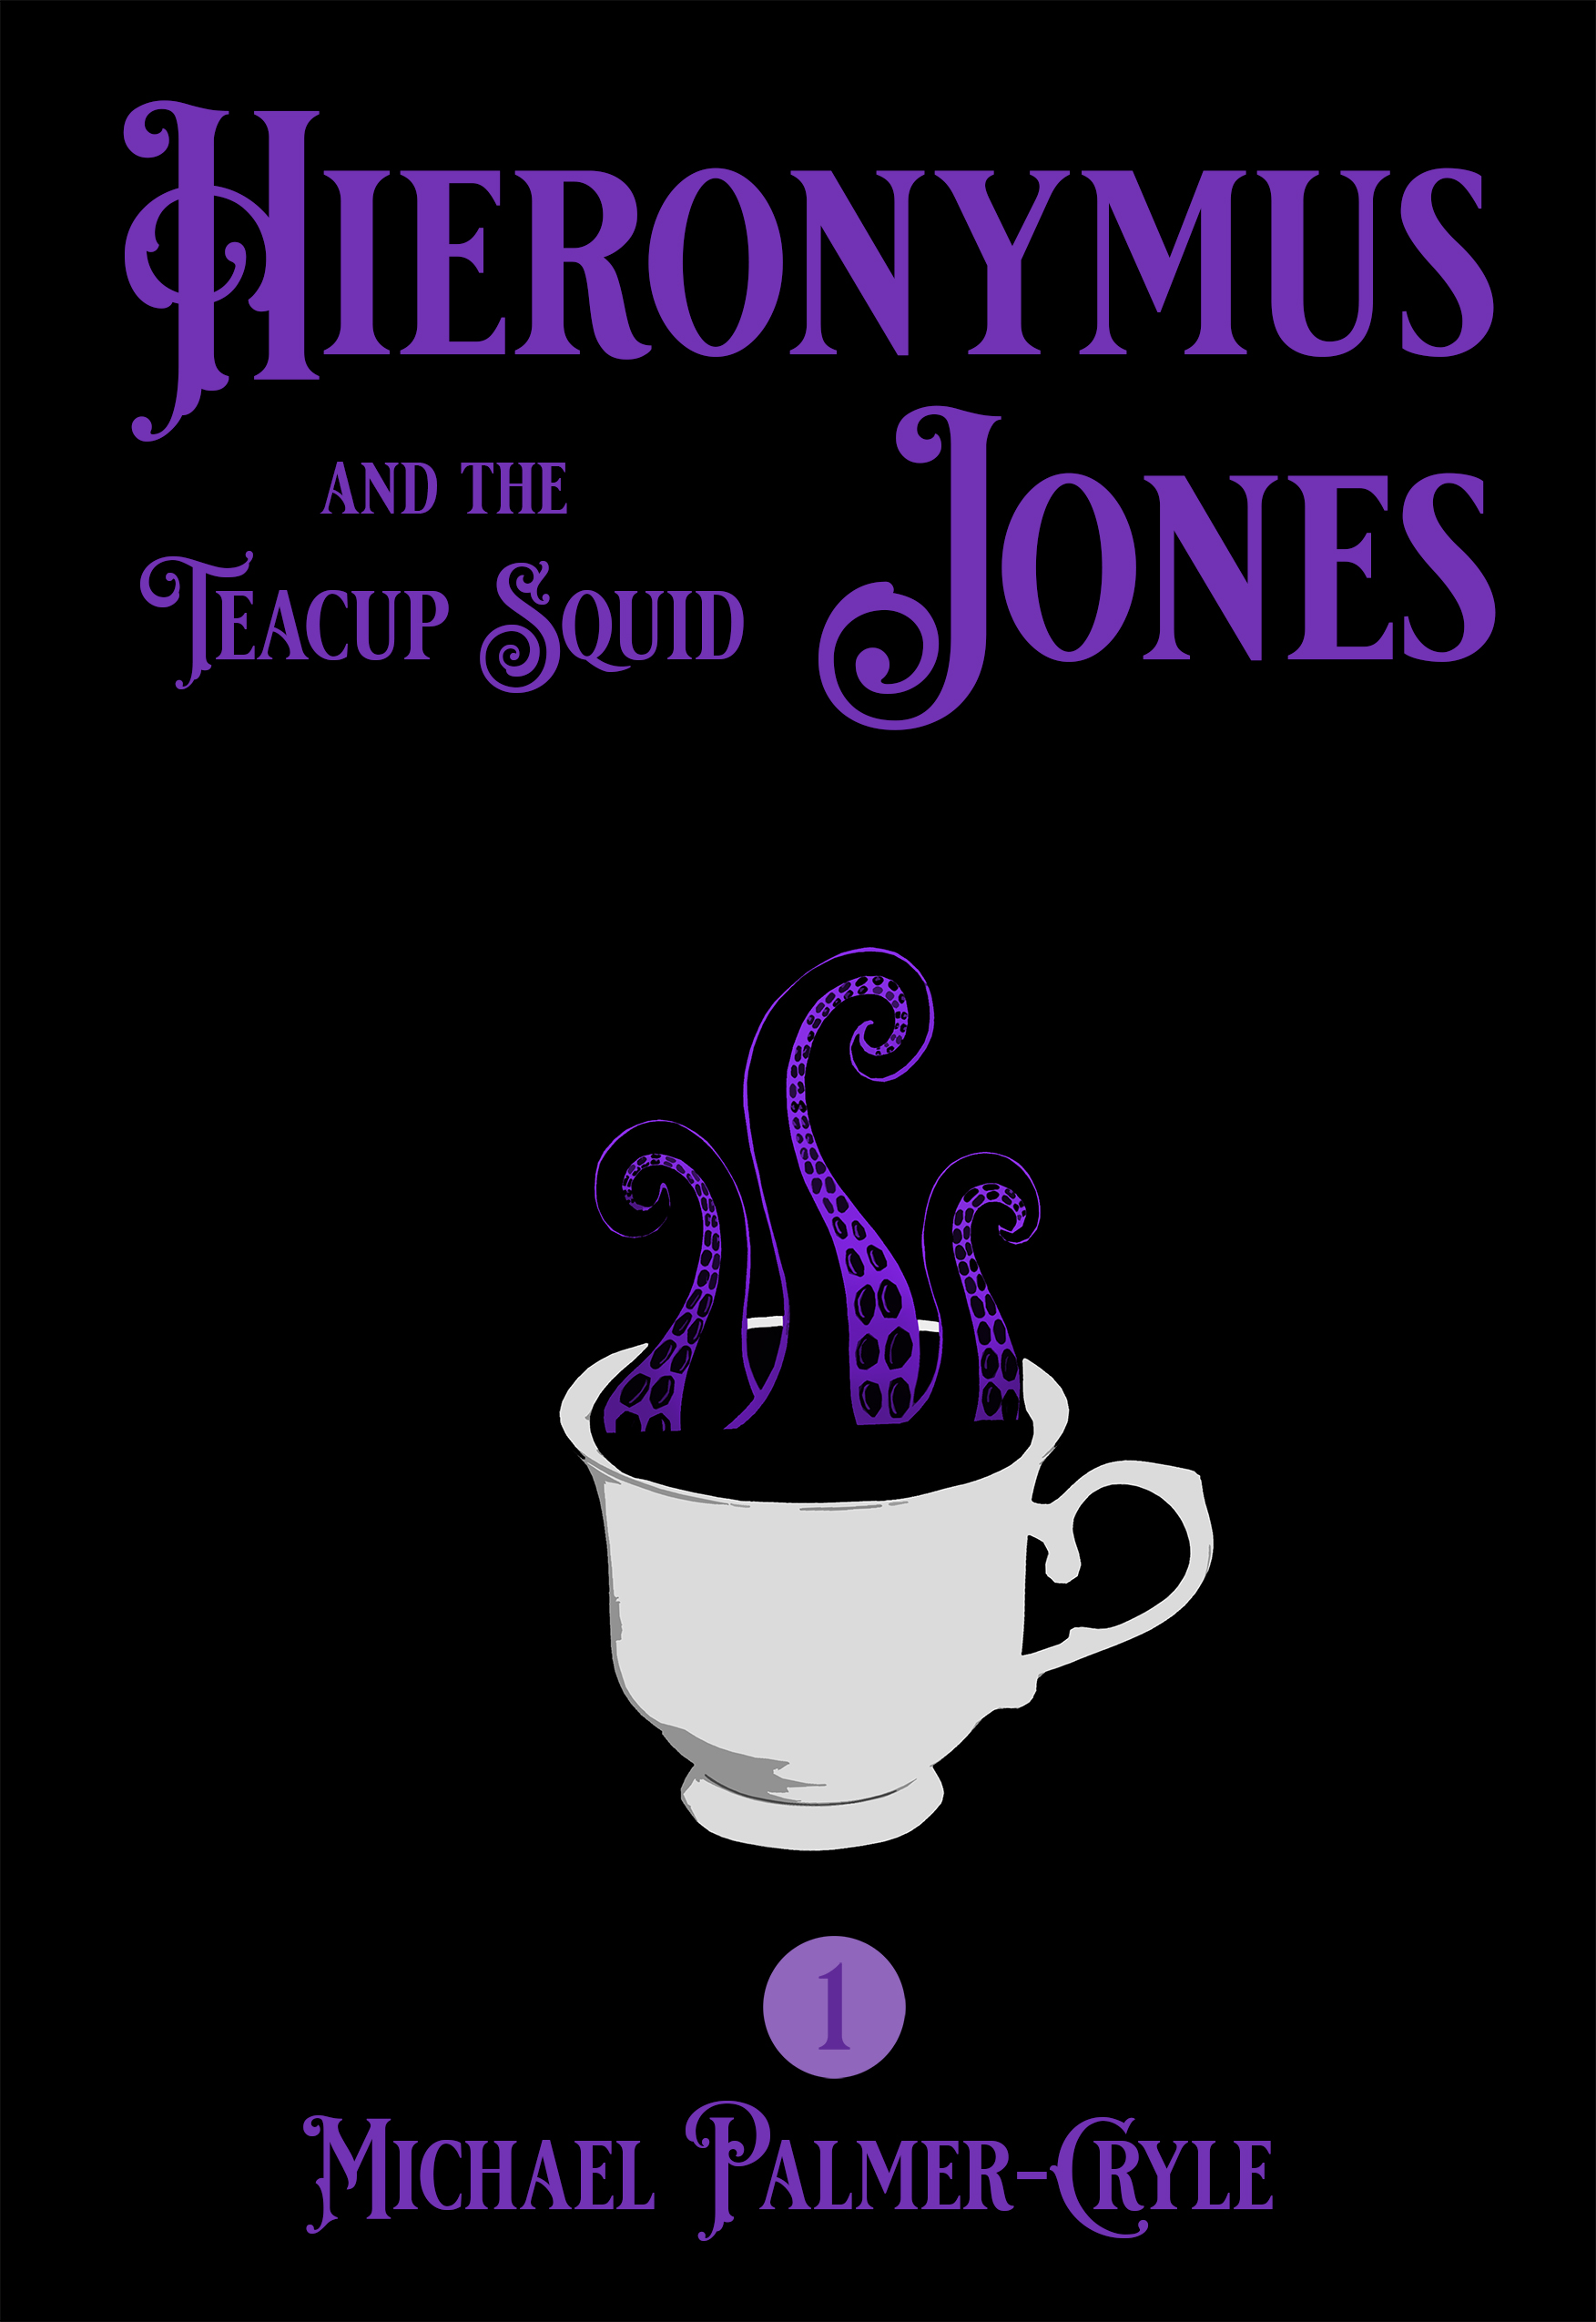 FREE: Hieronymus Jones and the teacup squid by Michael Palmer-Cryle